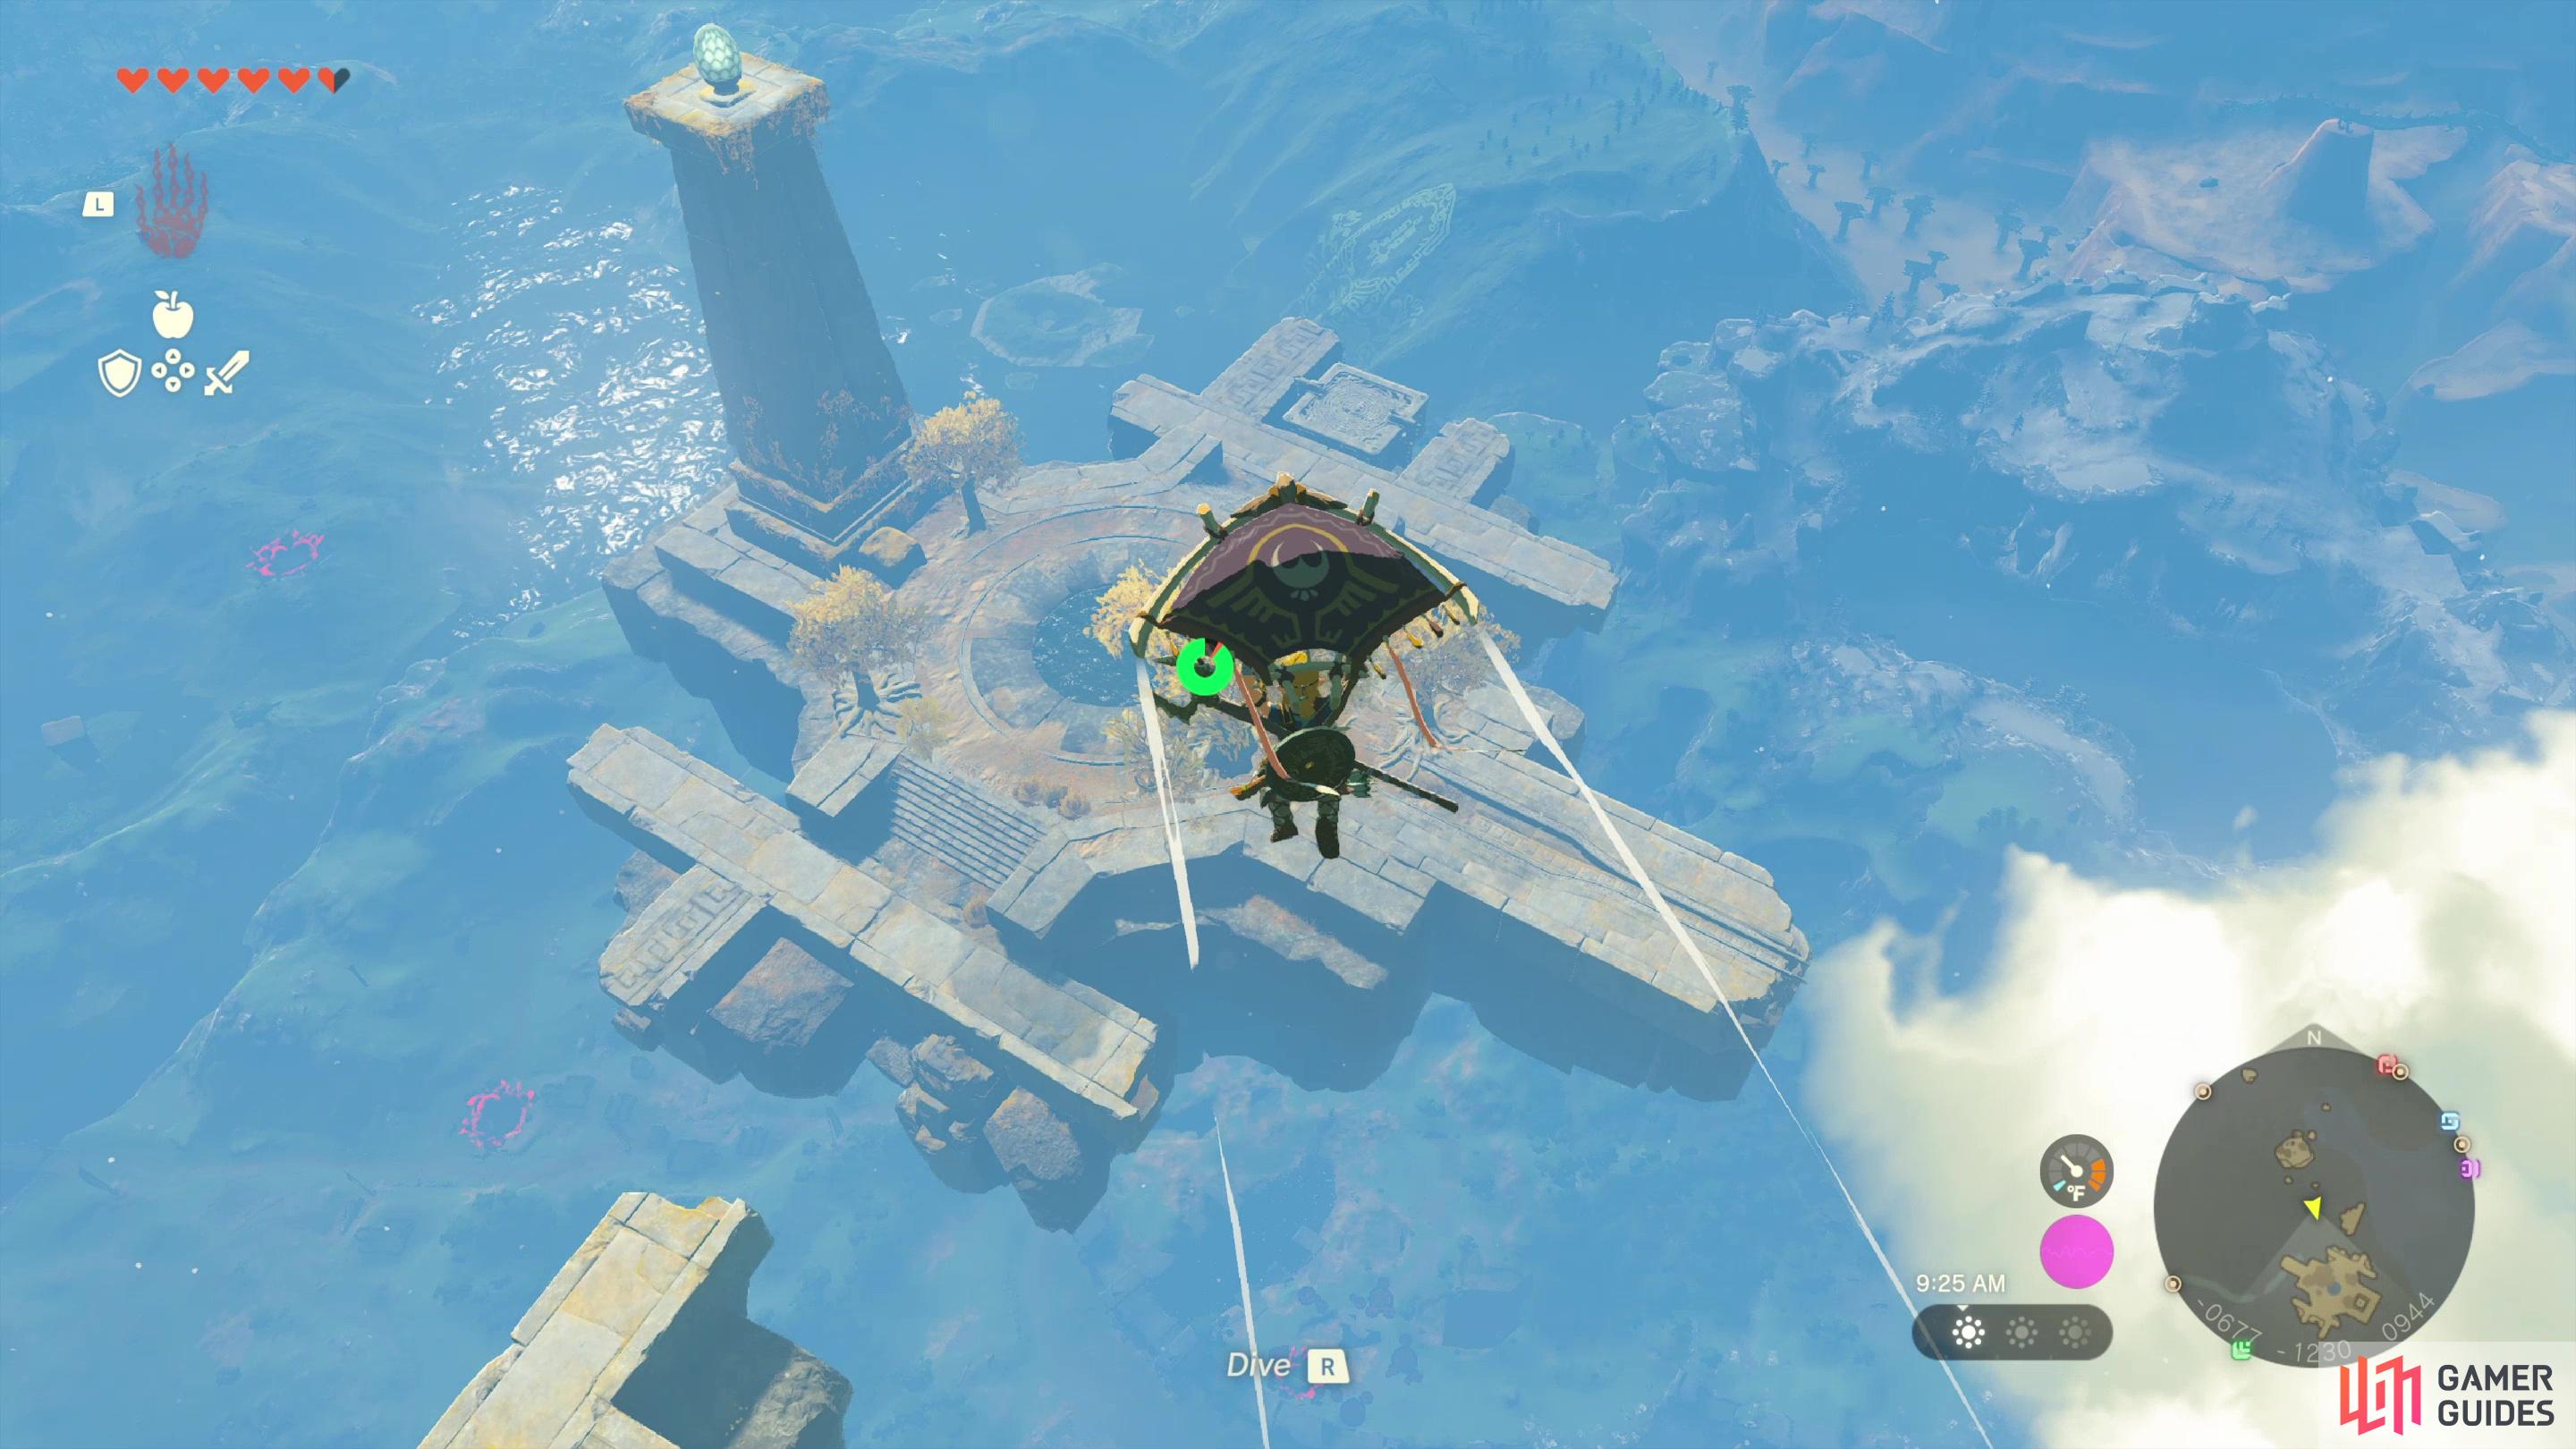 Launching yourself up towers and gliding to unexplored sky islands is one way to go about reaching new sky islands.